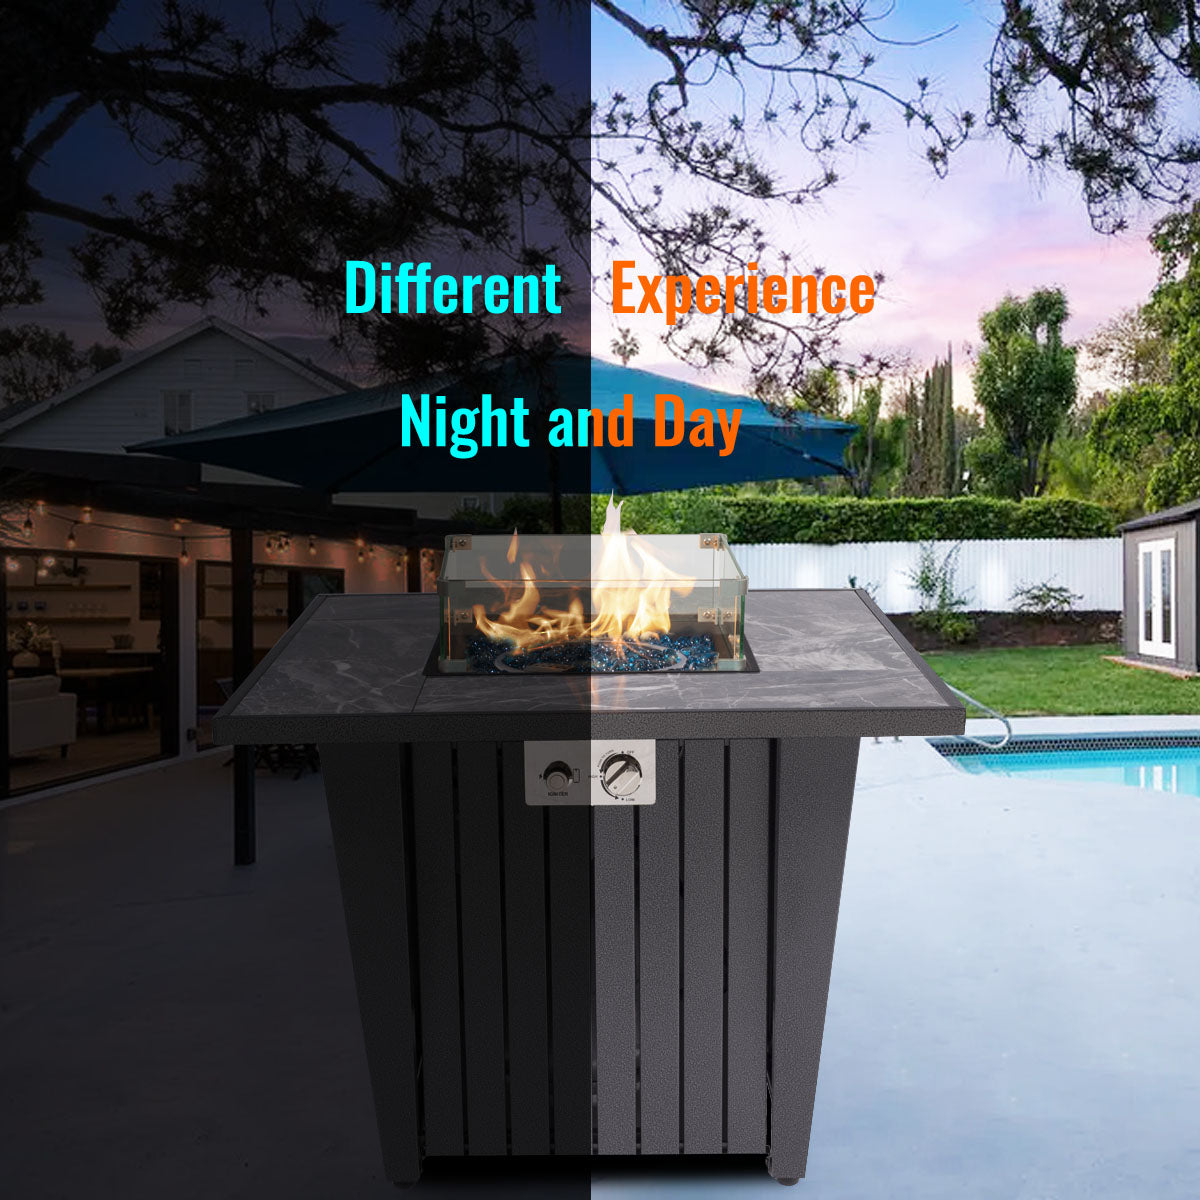 32" Propane Fire Pit Table with Marble Tabletop and 50,000 BTU Output - Sleek and Modern Design for Outdoor Heating and Entertainment